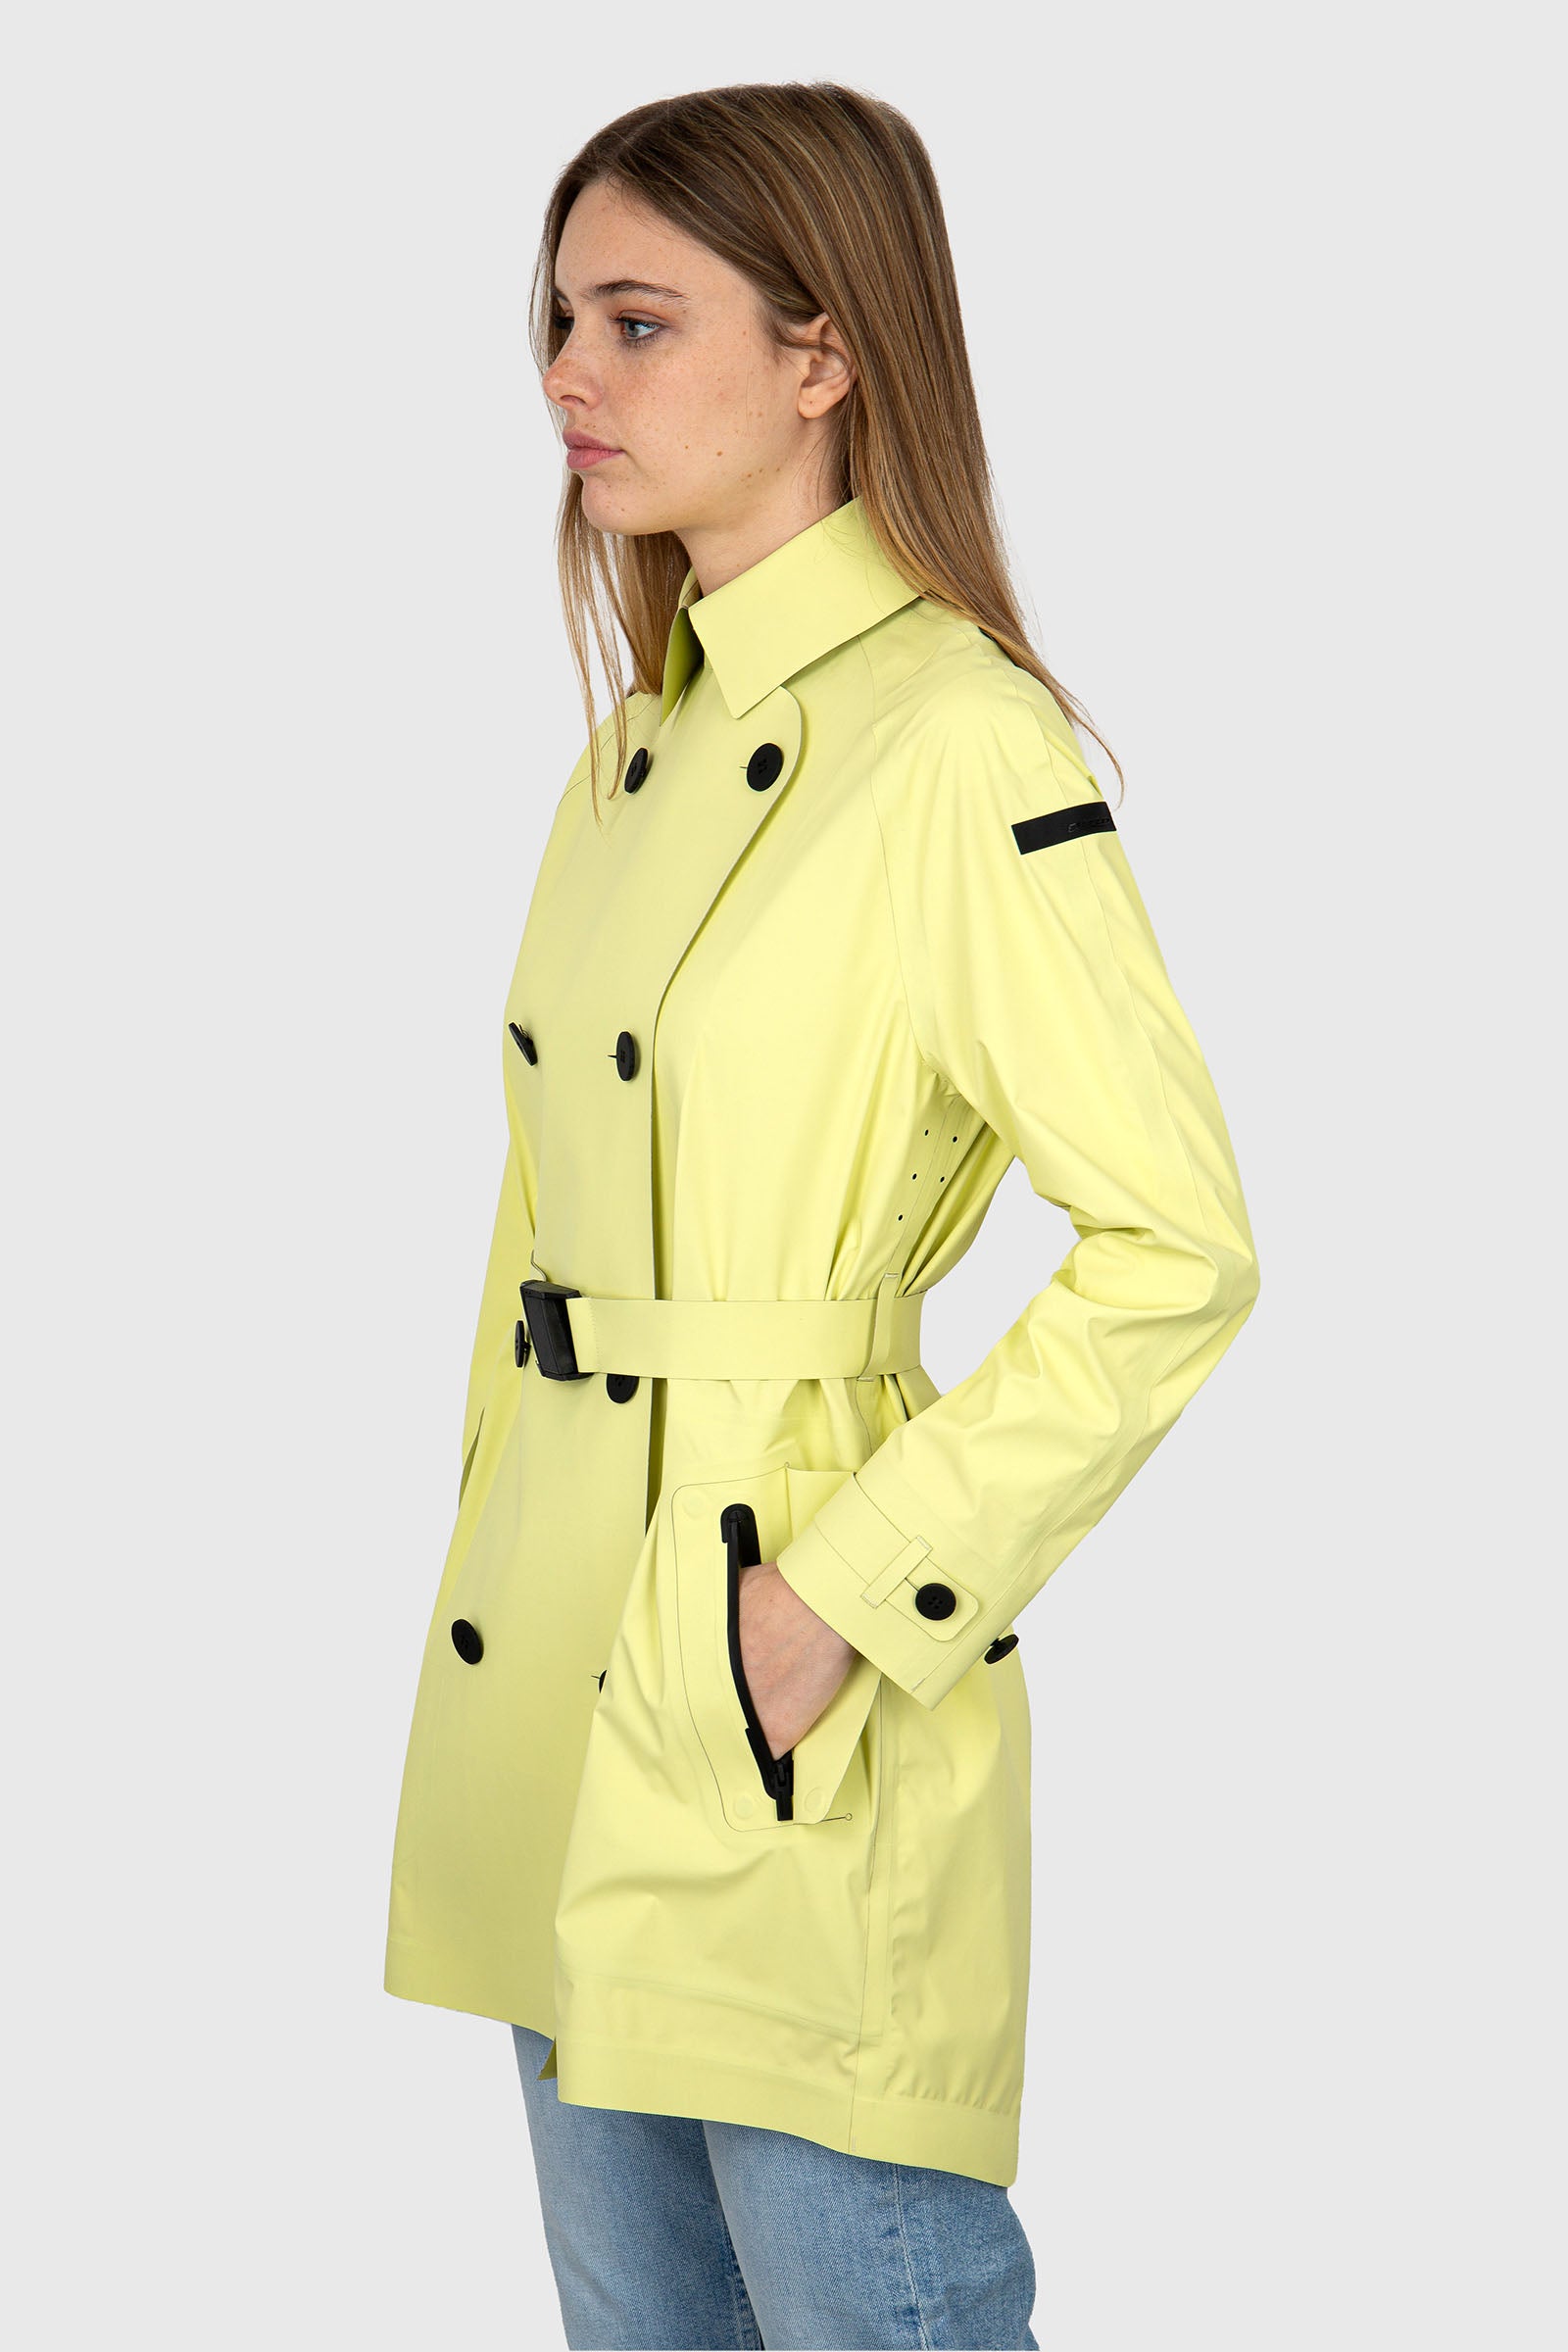 RRD Tech Pack Synthetic Yellow Trench - 3